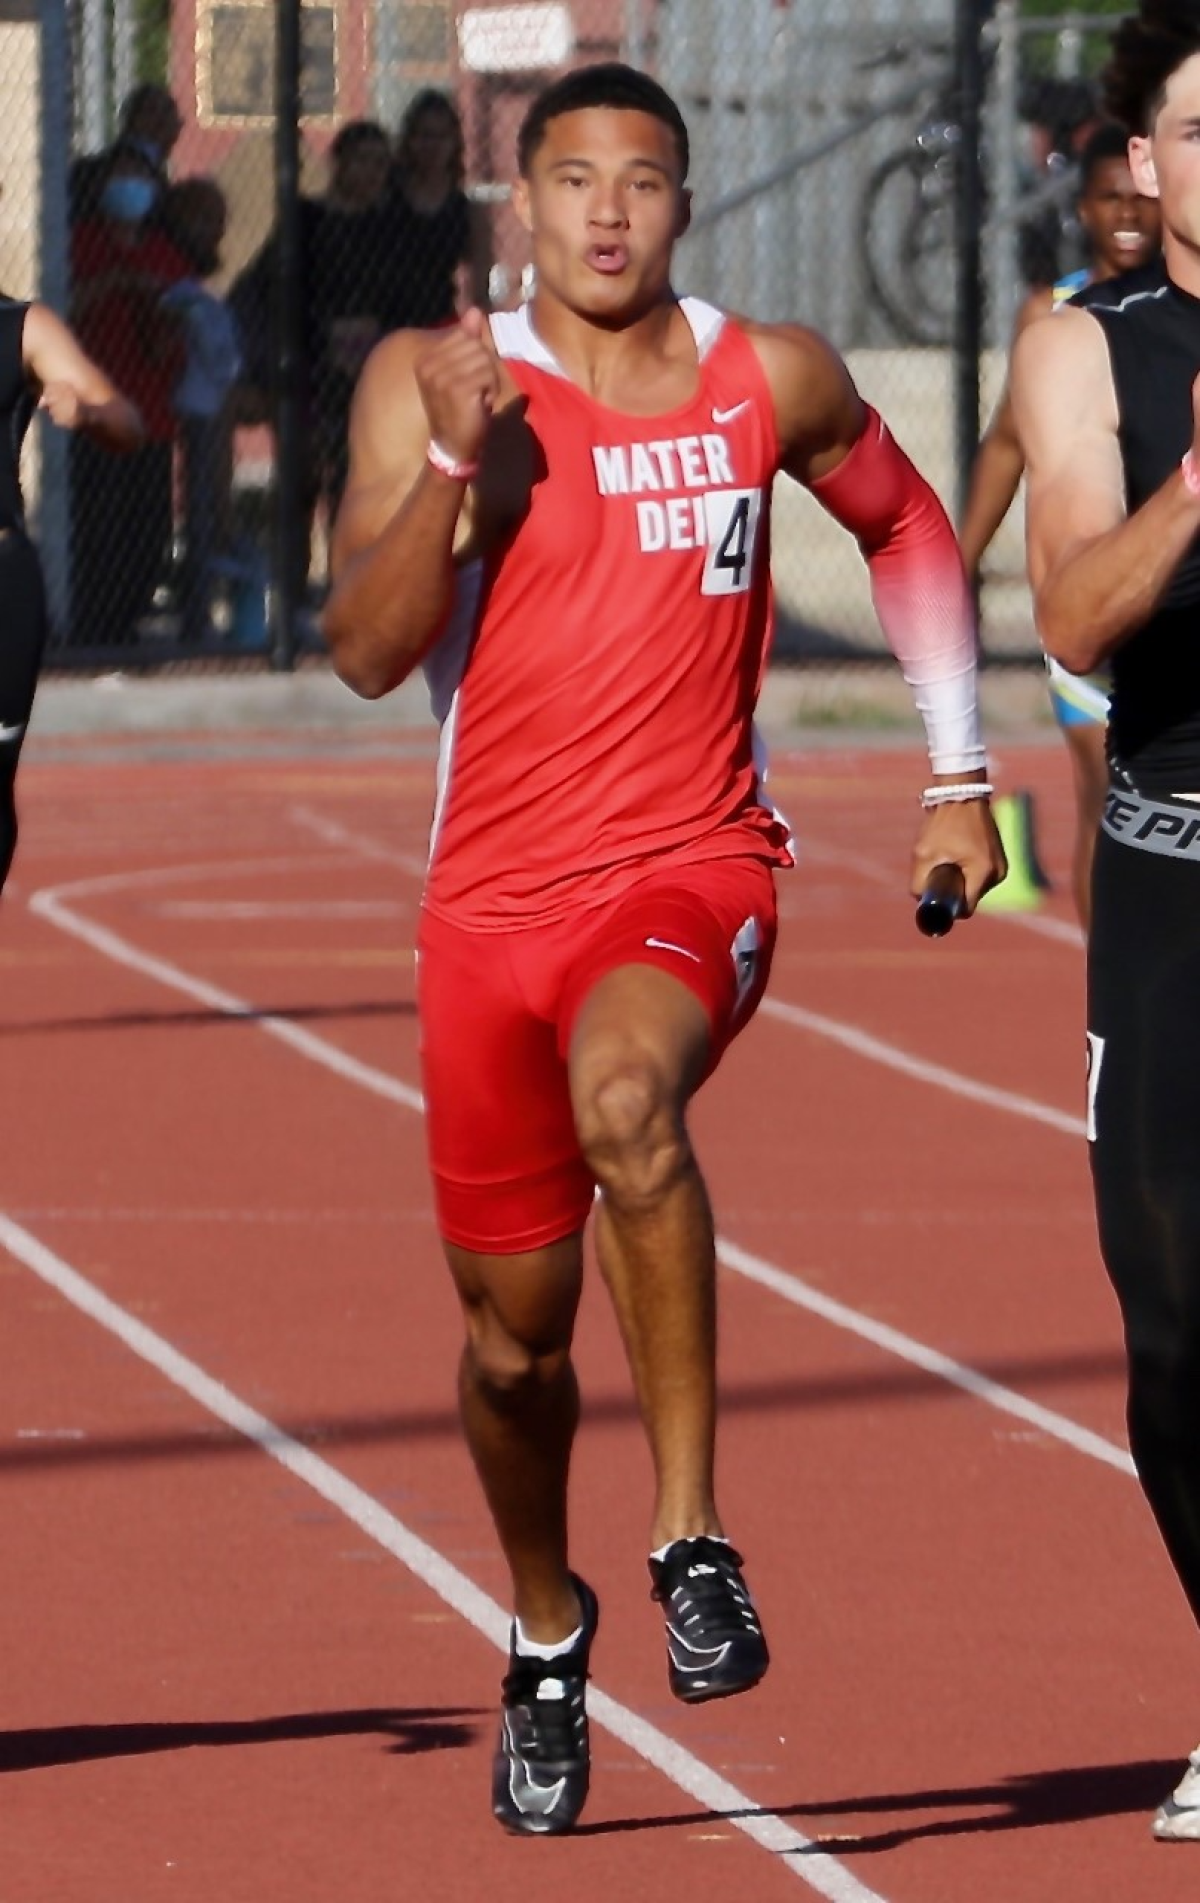 Domani Jackson of Mater Dei wins the 100-meter dash in 10.25 seconds, tying the state record.